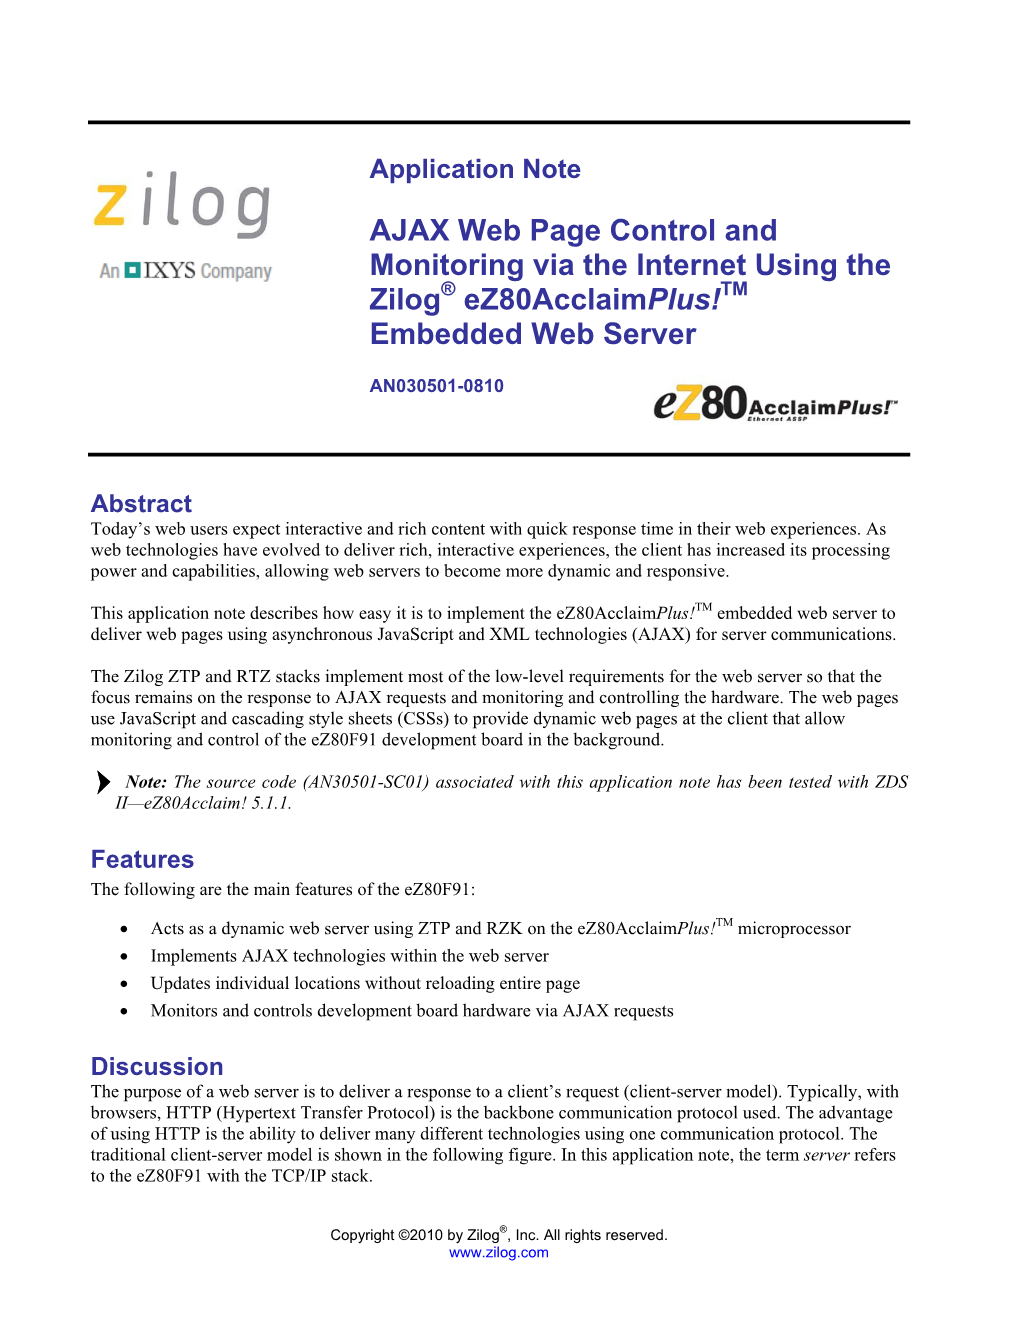 AJAX Web Page Control and Monitoring Via the Internet Using the Zilog® Ez80acclaimplus!TM Embedded Web Server